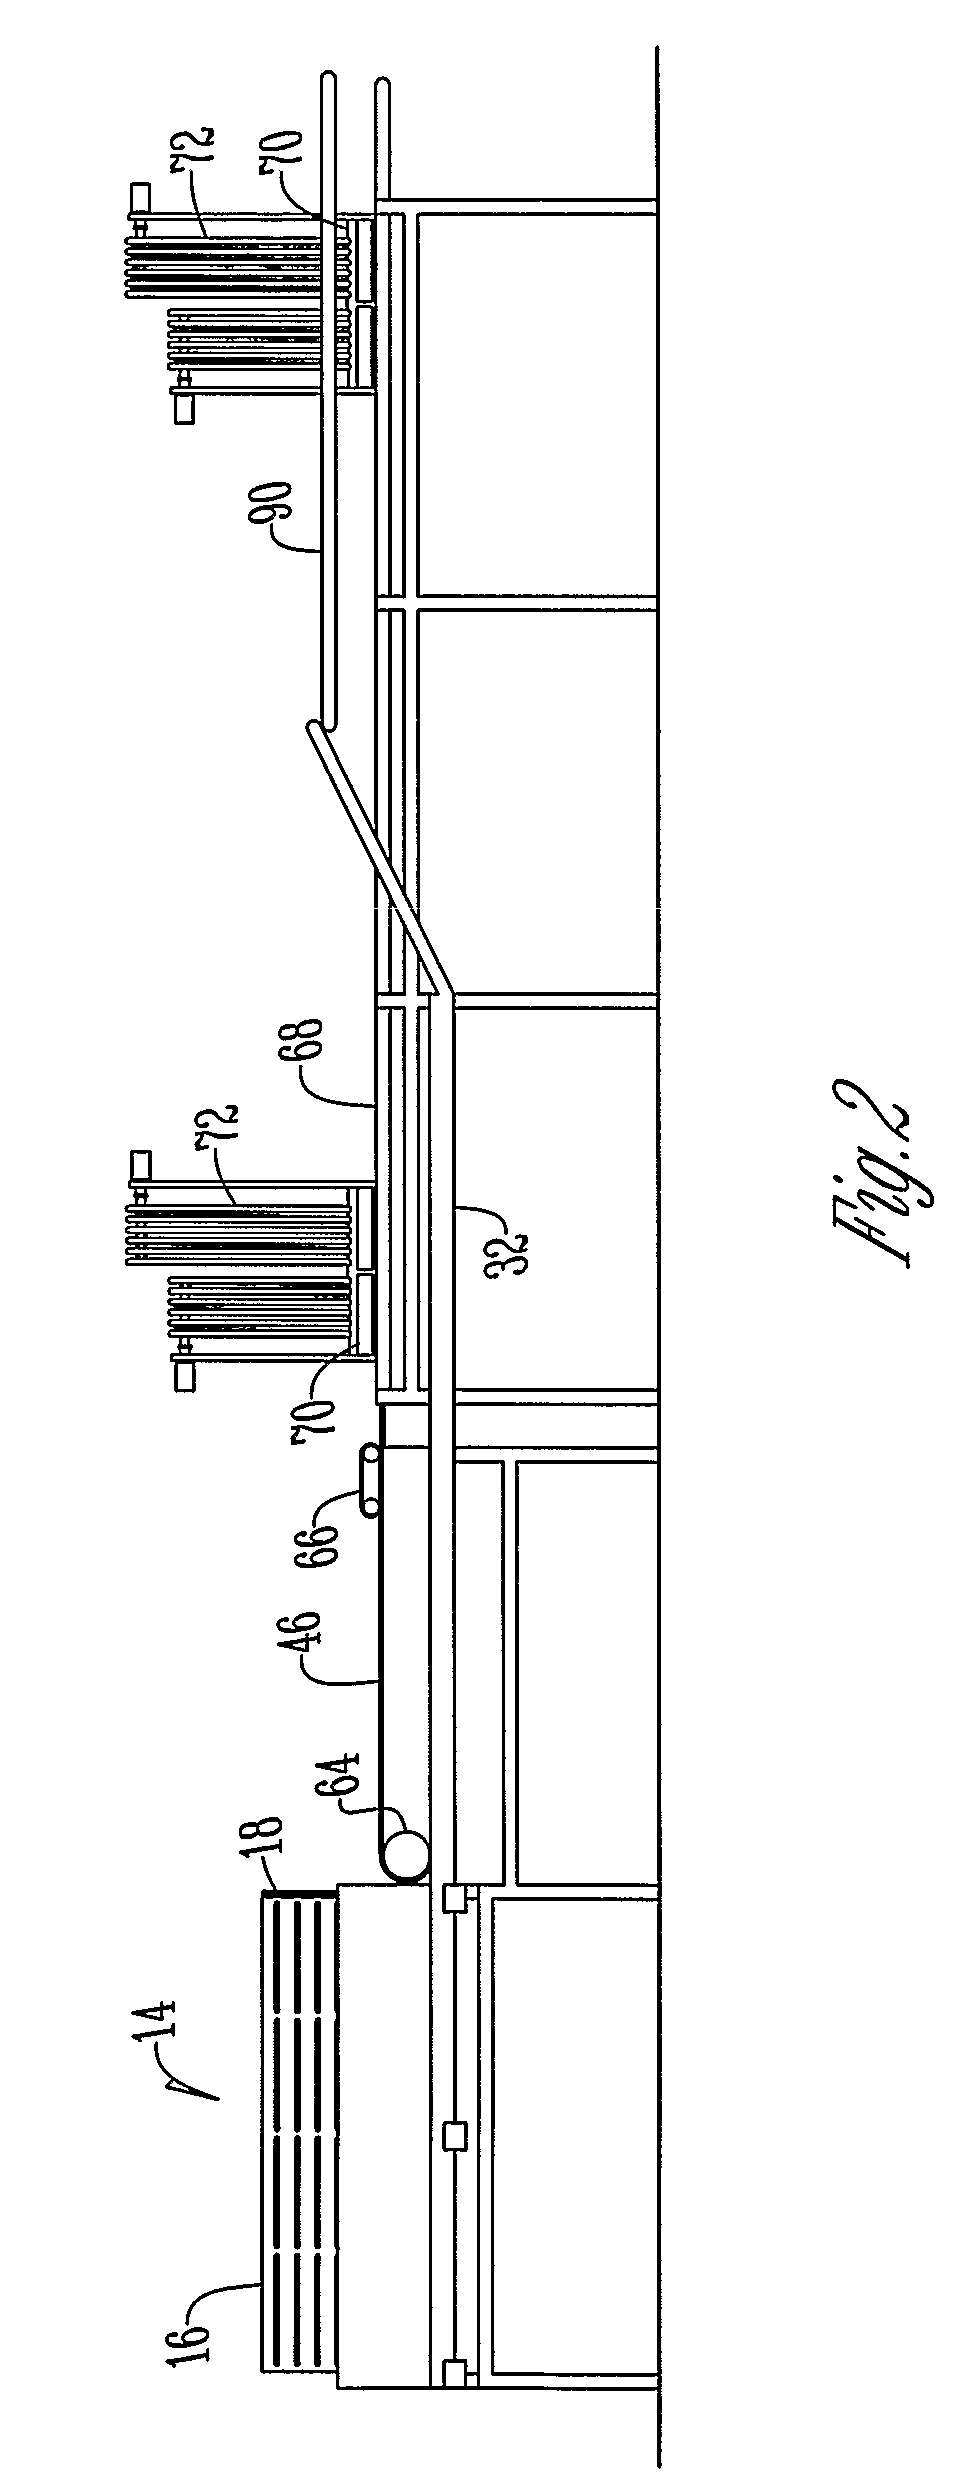 Apparatus and method of transporting food products to a loading head